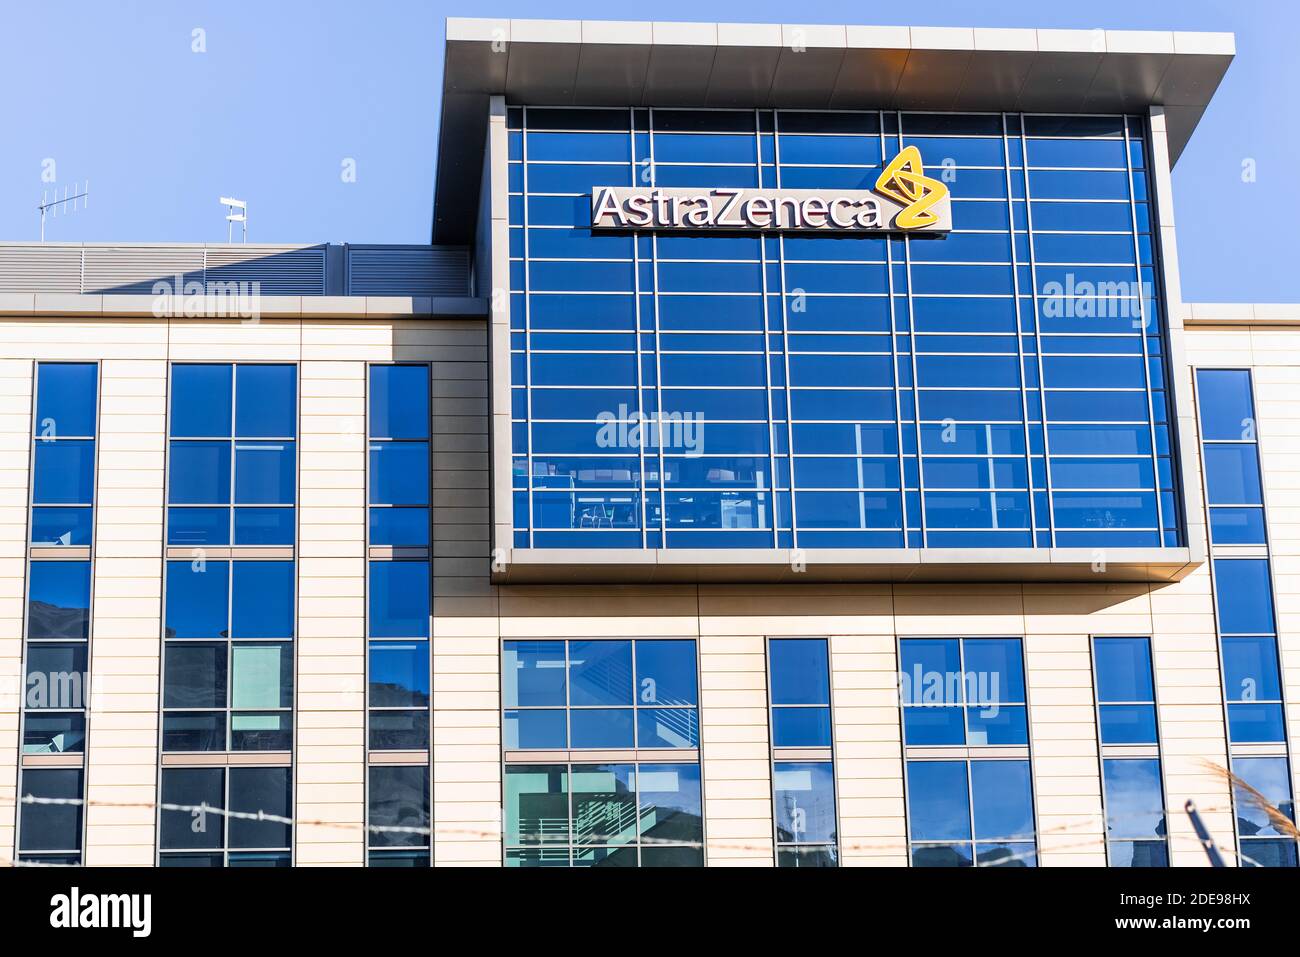 Sep 21, 2020 South San Francisco / CA / USA - Astra Zeneca headquarters in Silicon Valley; AstraZeneca plc is a British multinational pharmaceutical c Stock Photo